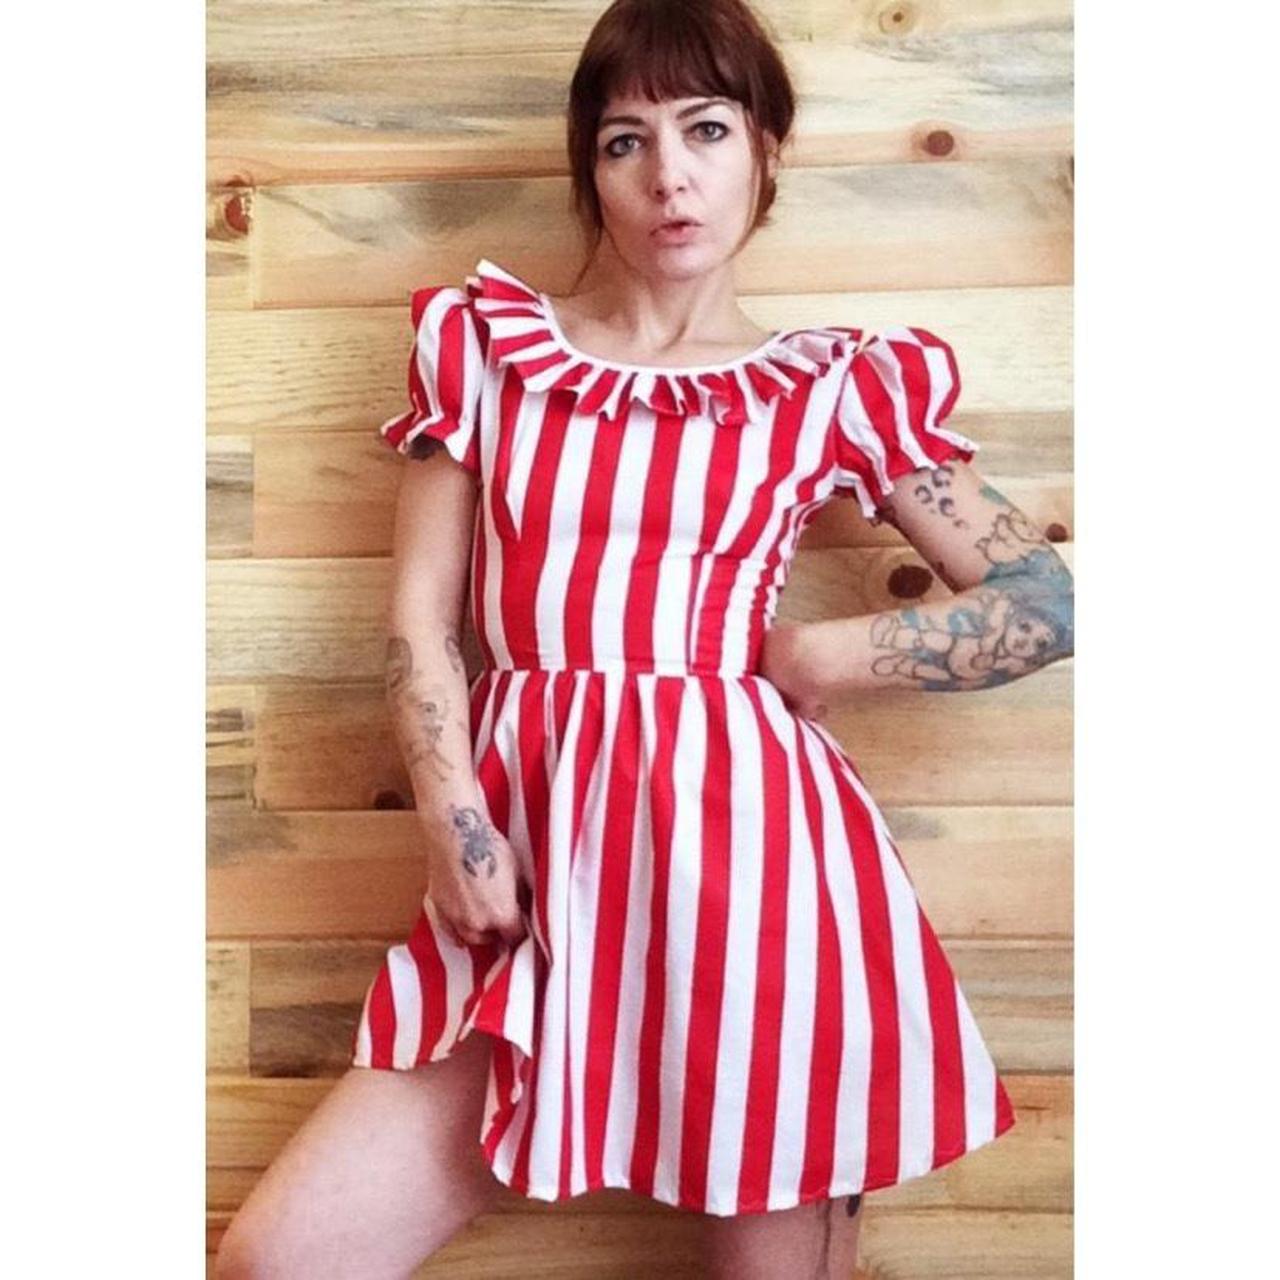 Square Dance Dress. Cotton fitted and flared dress - Depop